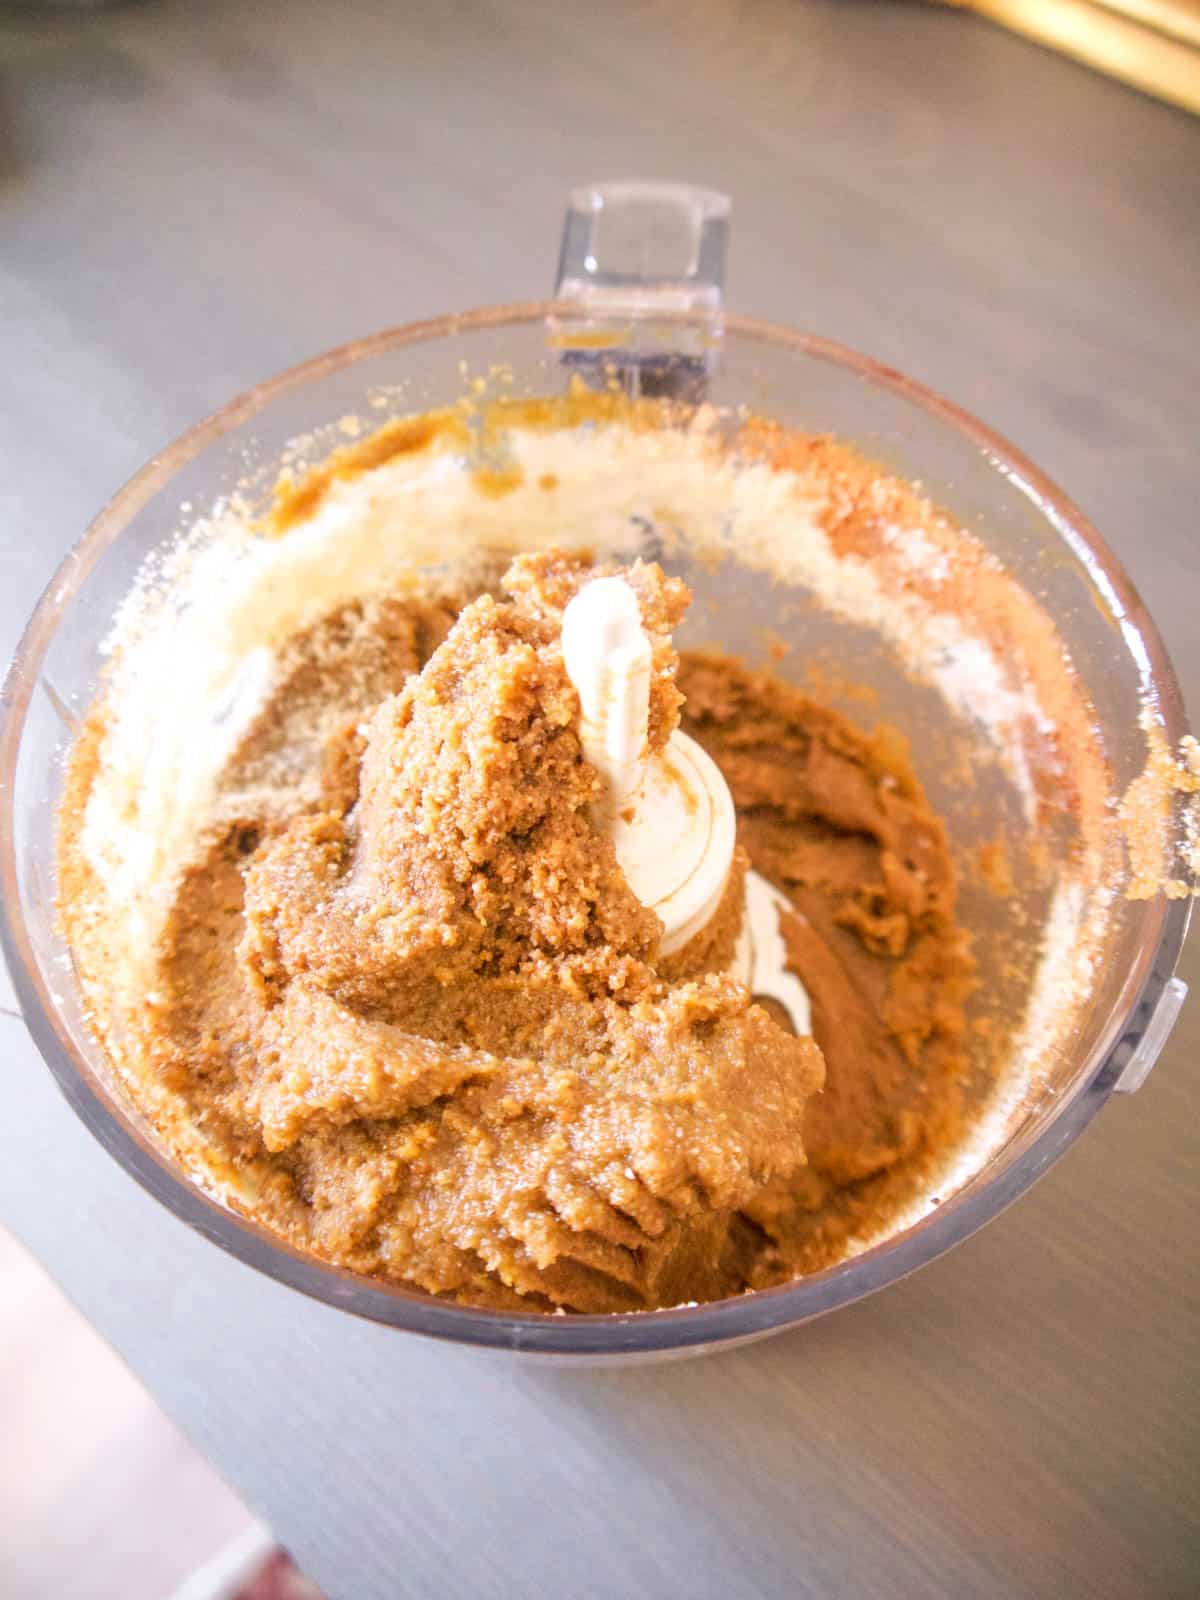 Ingredients in food processor mixed until a dough forms.